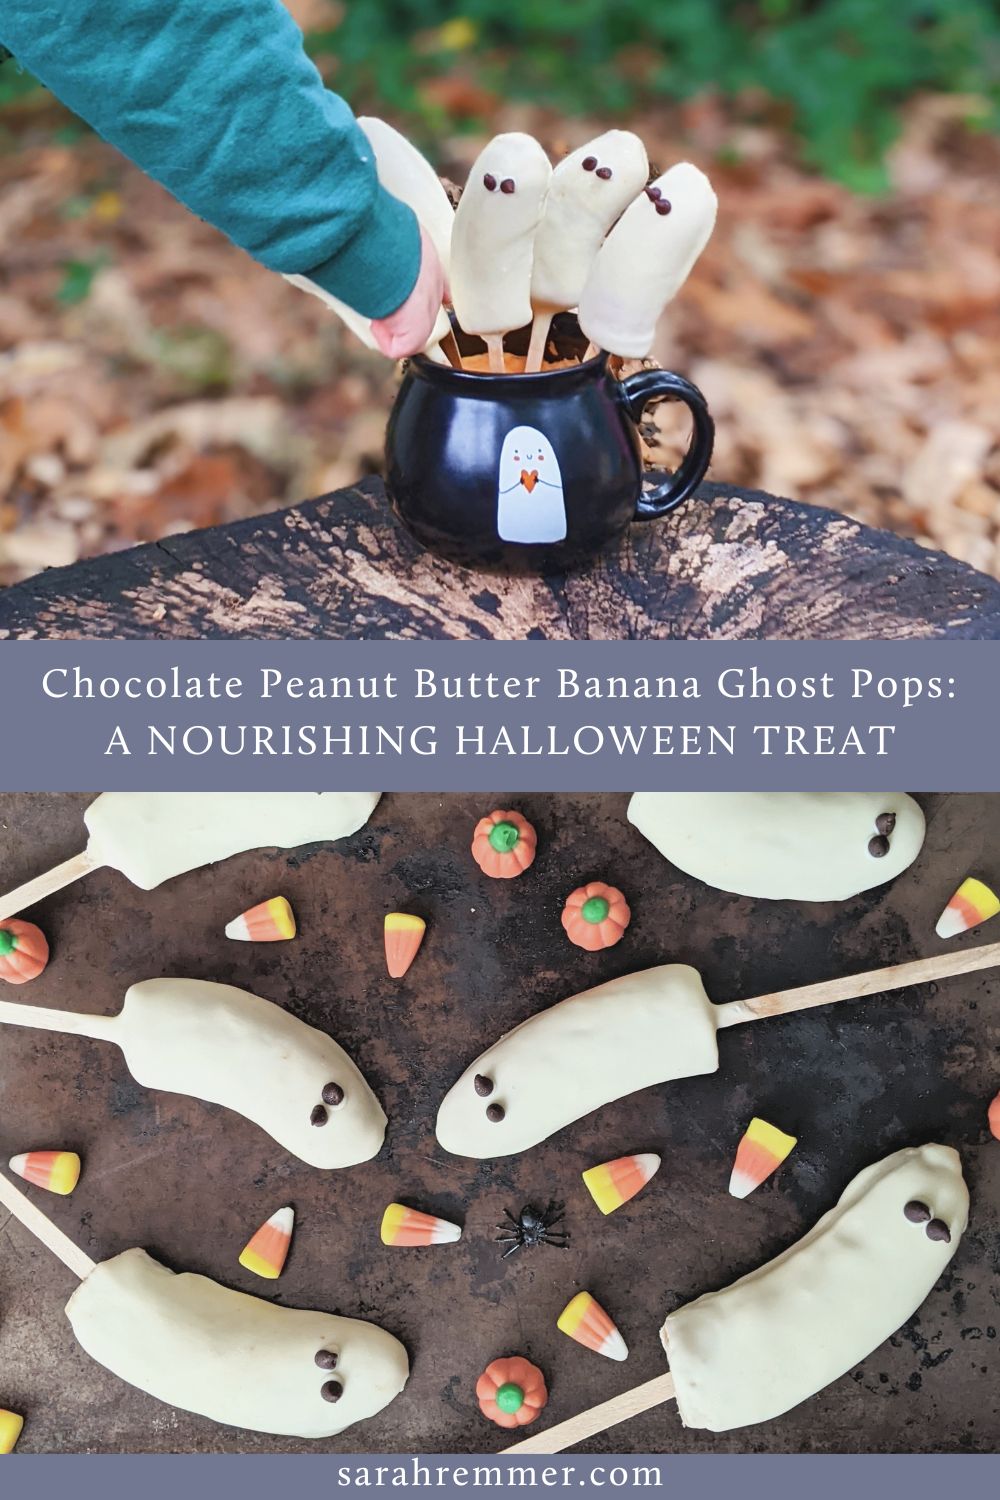 These chocolate banana ghost pops are the perfect snack for the days leading up to Halloween! A fun and healthy treat for kids.